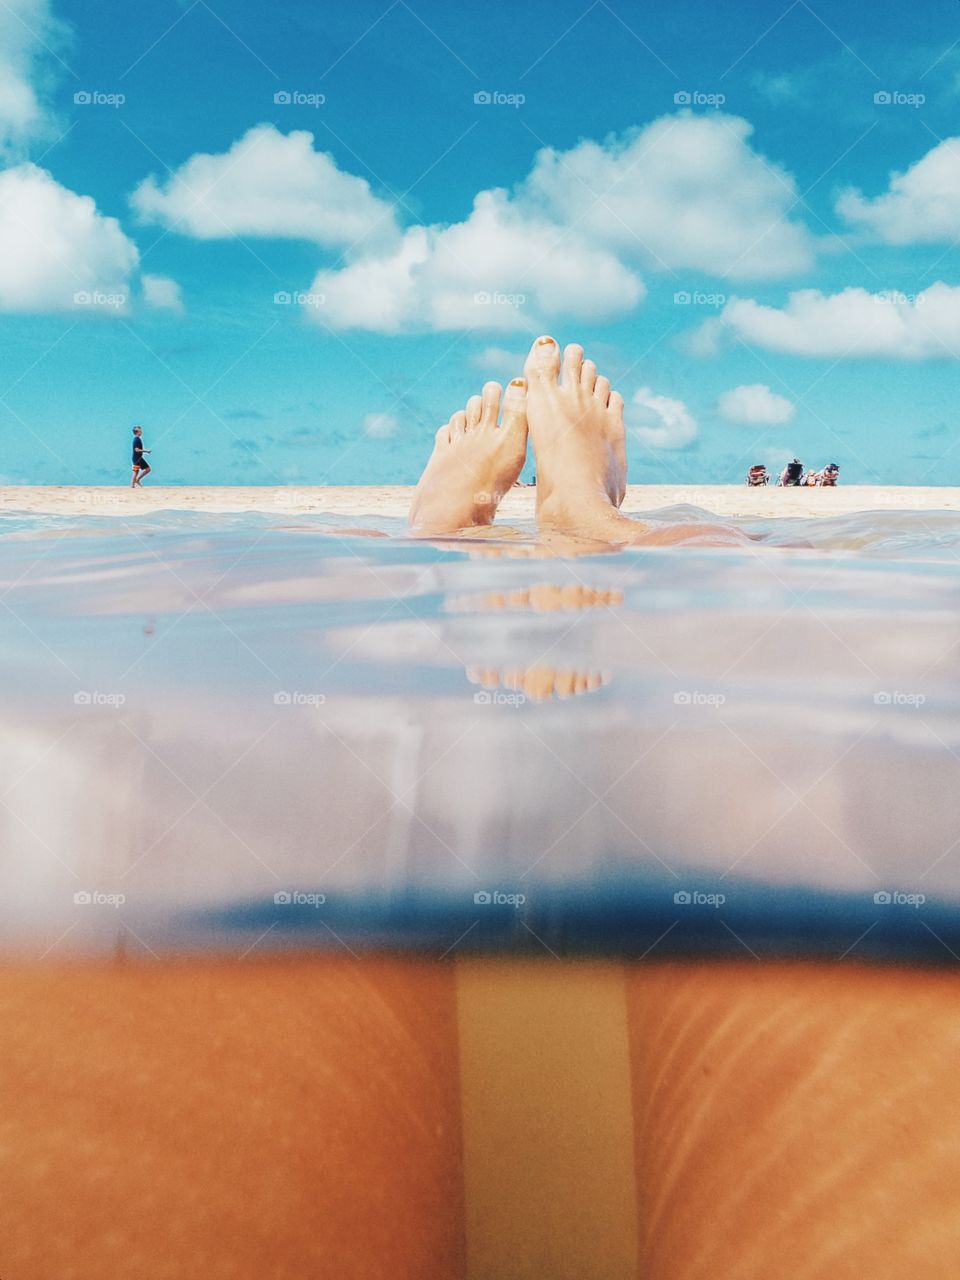 Relaxing point of view from underwater at the sandbar.